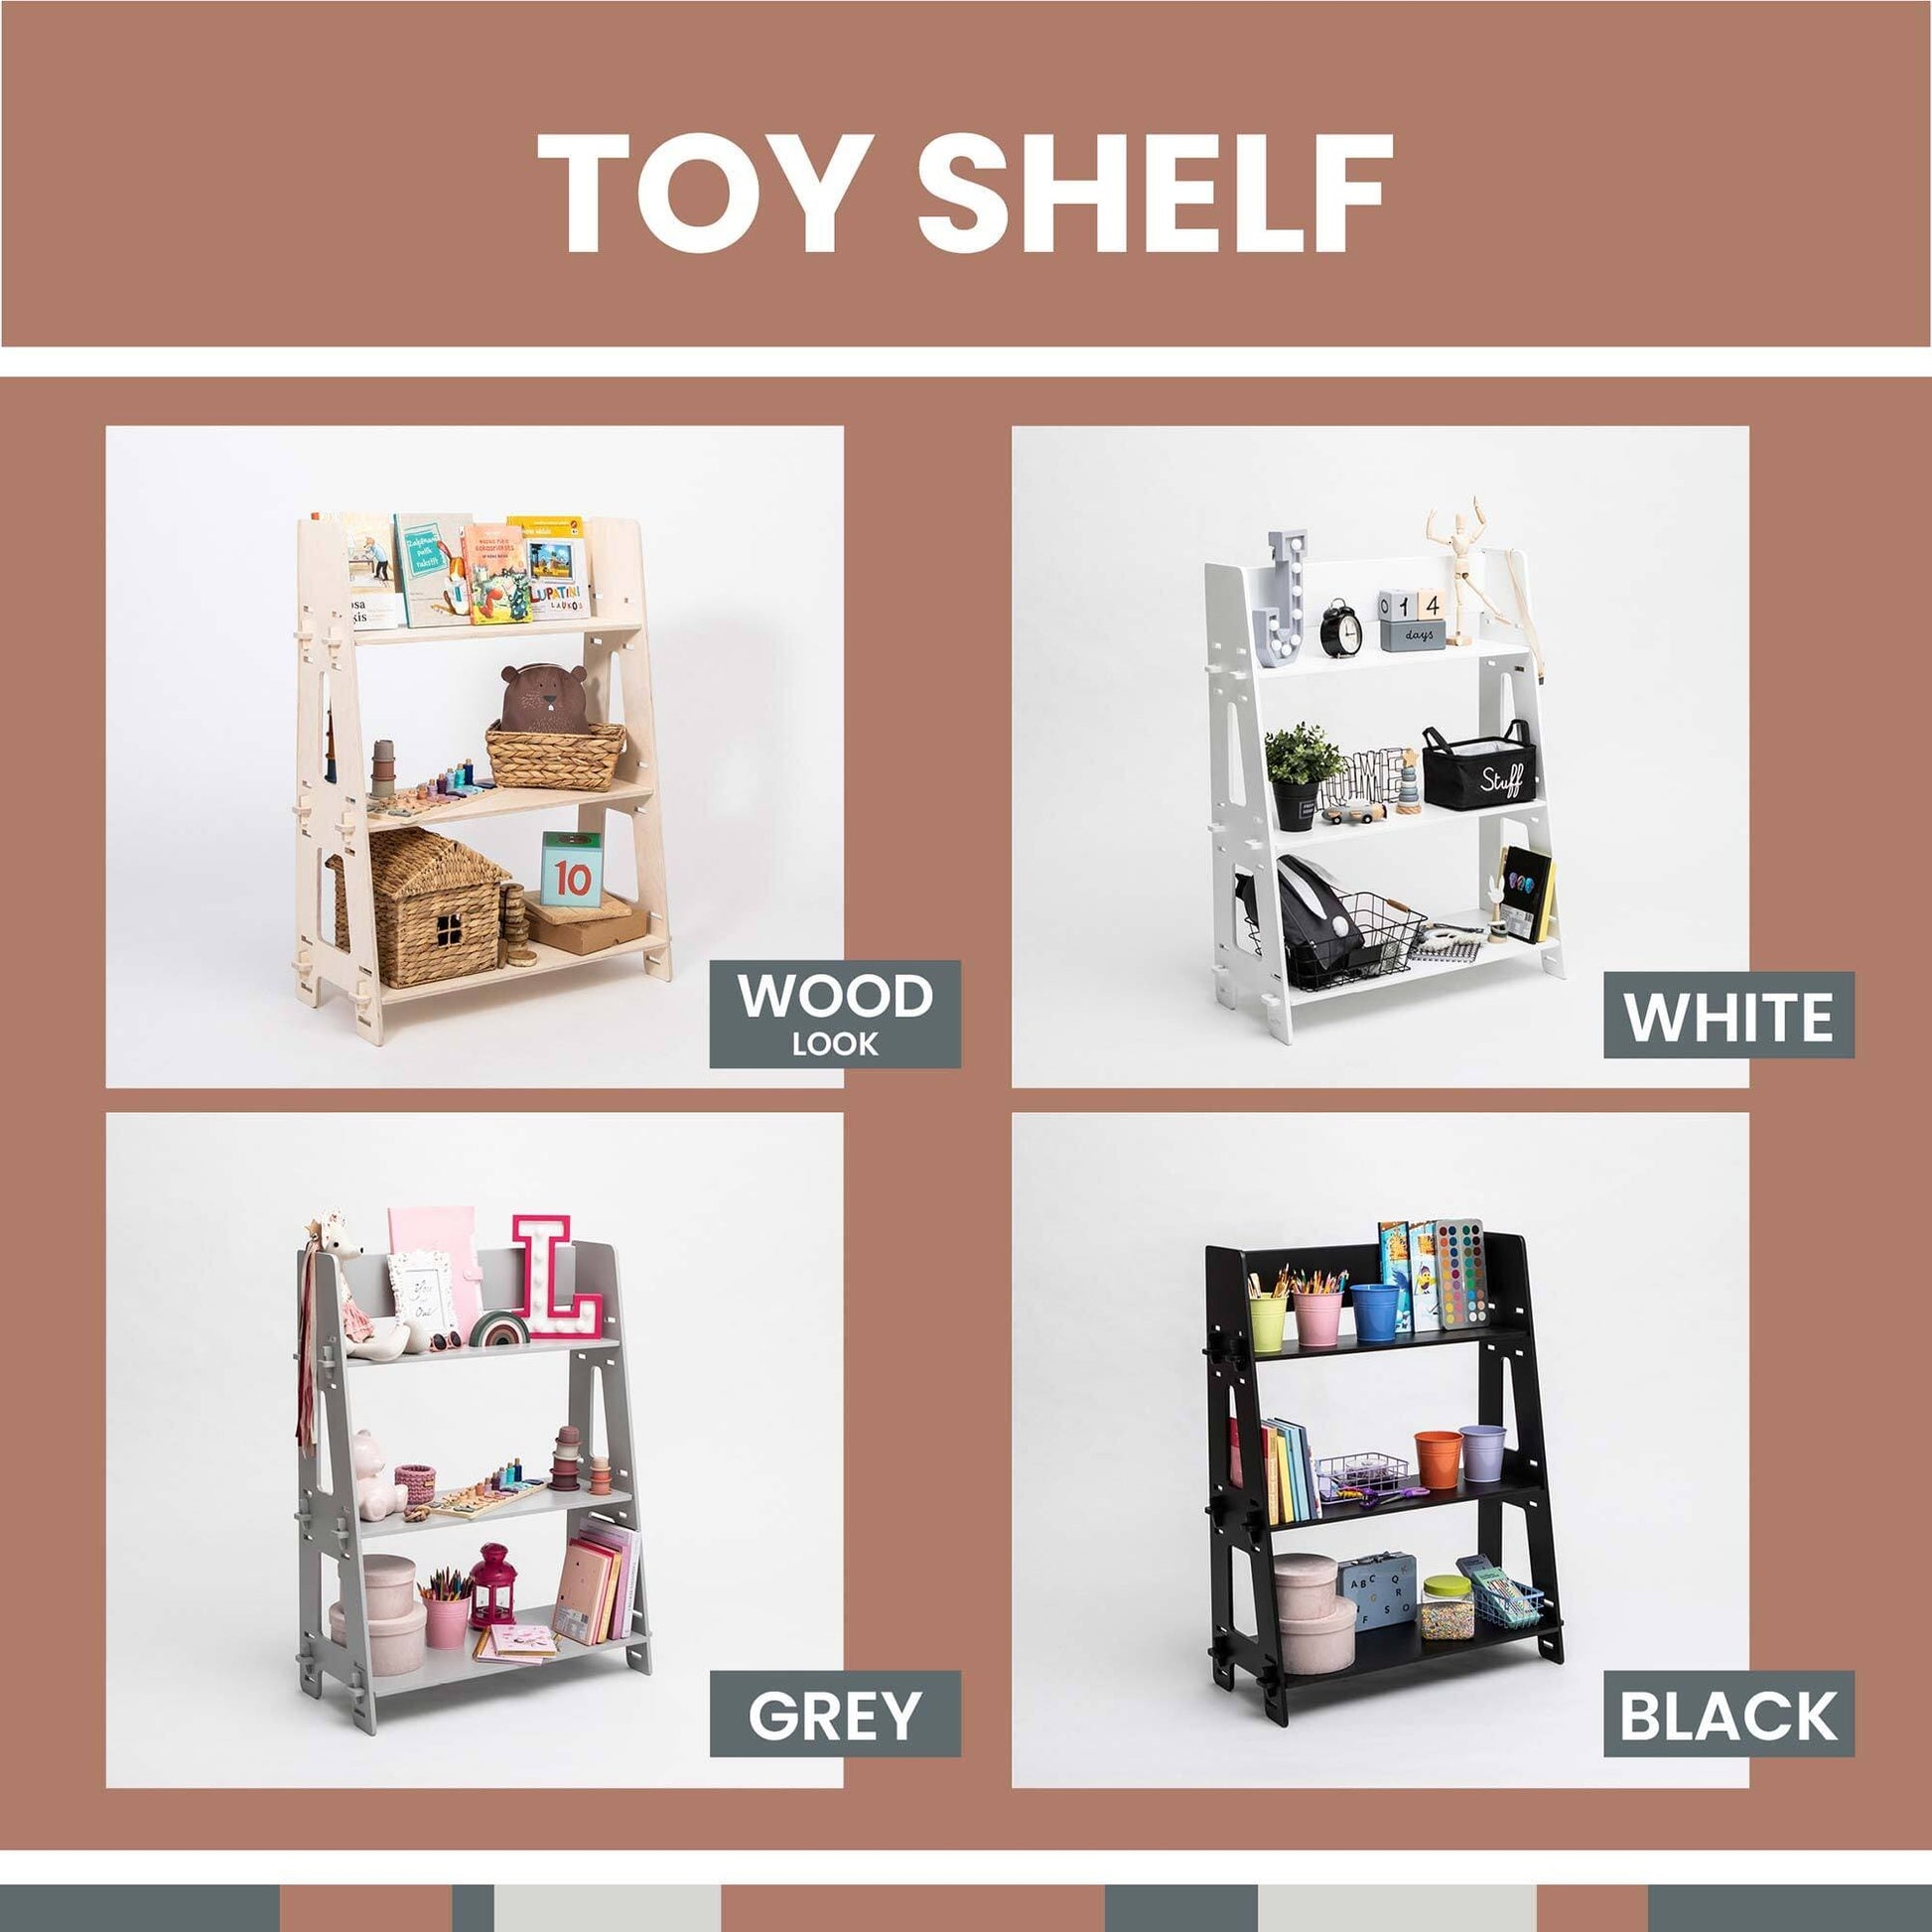 Four Montessori toy shelves in different colors and designs: wood, white, grey, and black, each filled with assorted toys and knick-knacks, ideal for a nursery or children's bedroom.